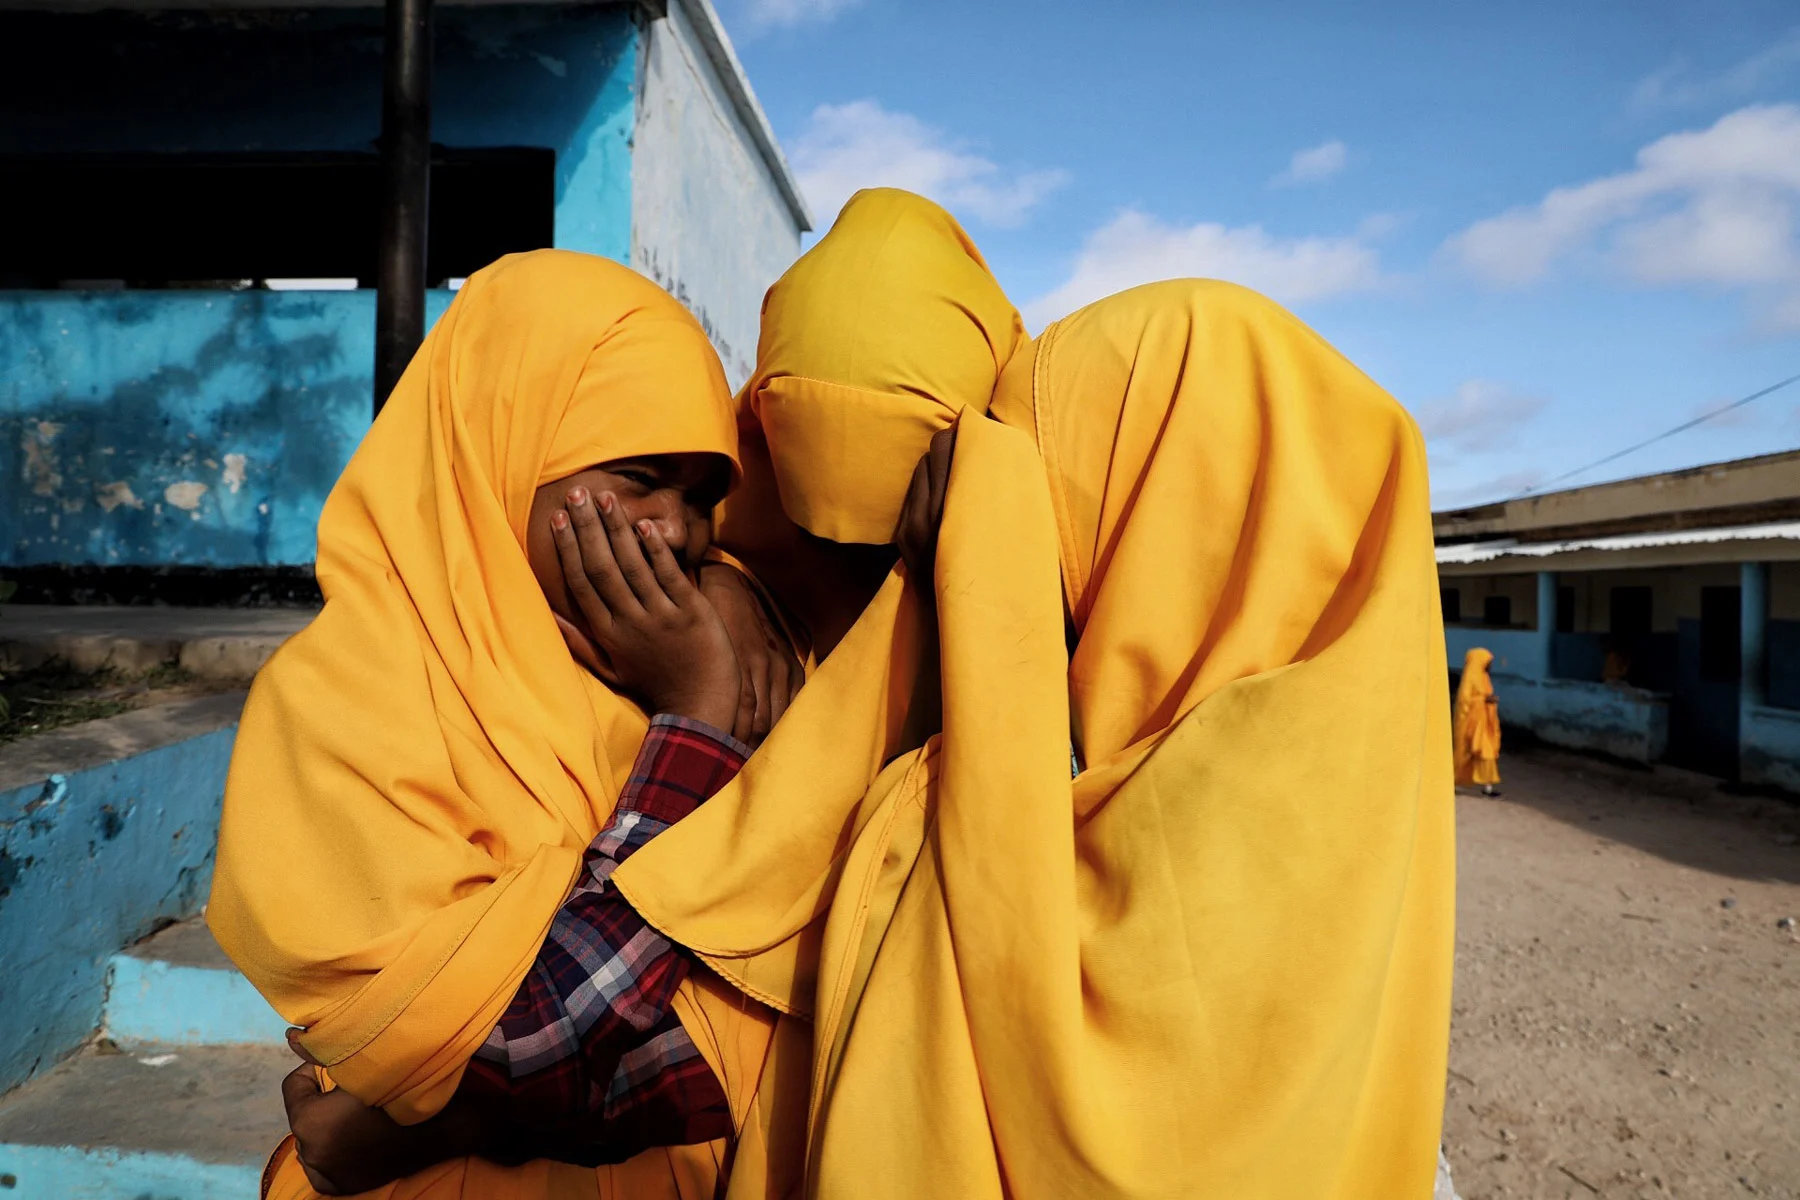 School girls pose for a photo after class in Mogadishu, Somalia